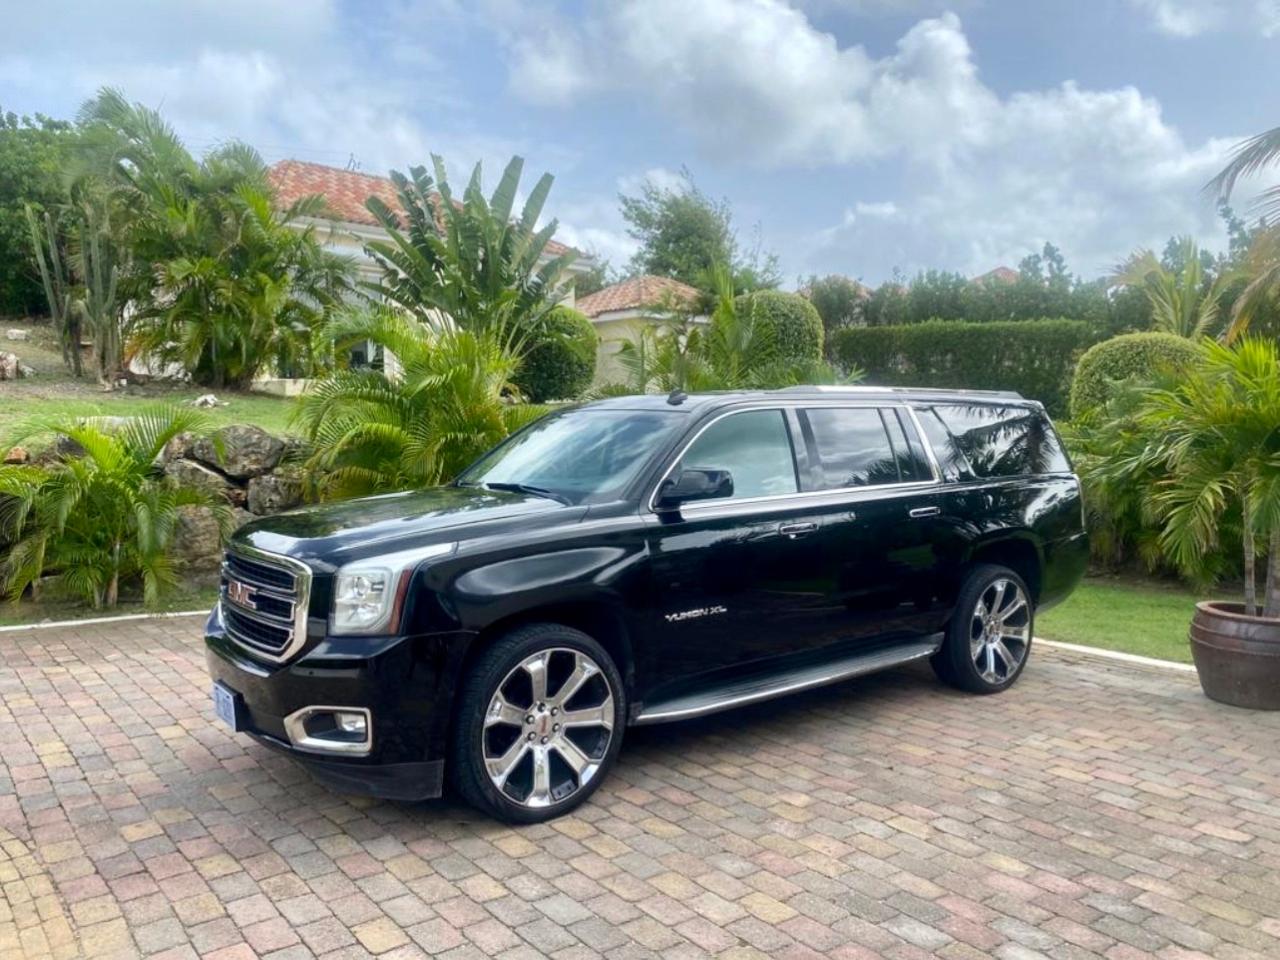 VIP Arrival Transfer to St. Maarten/St. Martin Hotel (Zone 3)